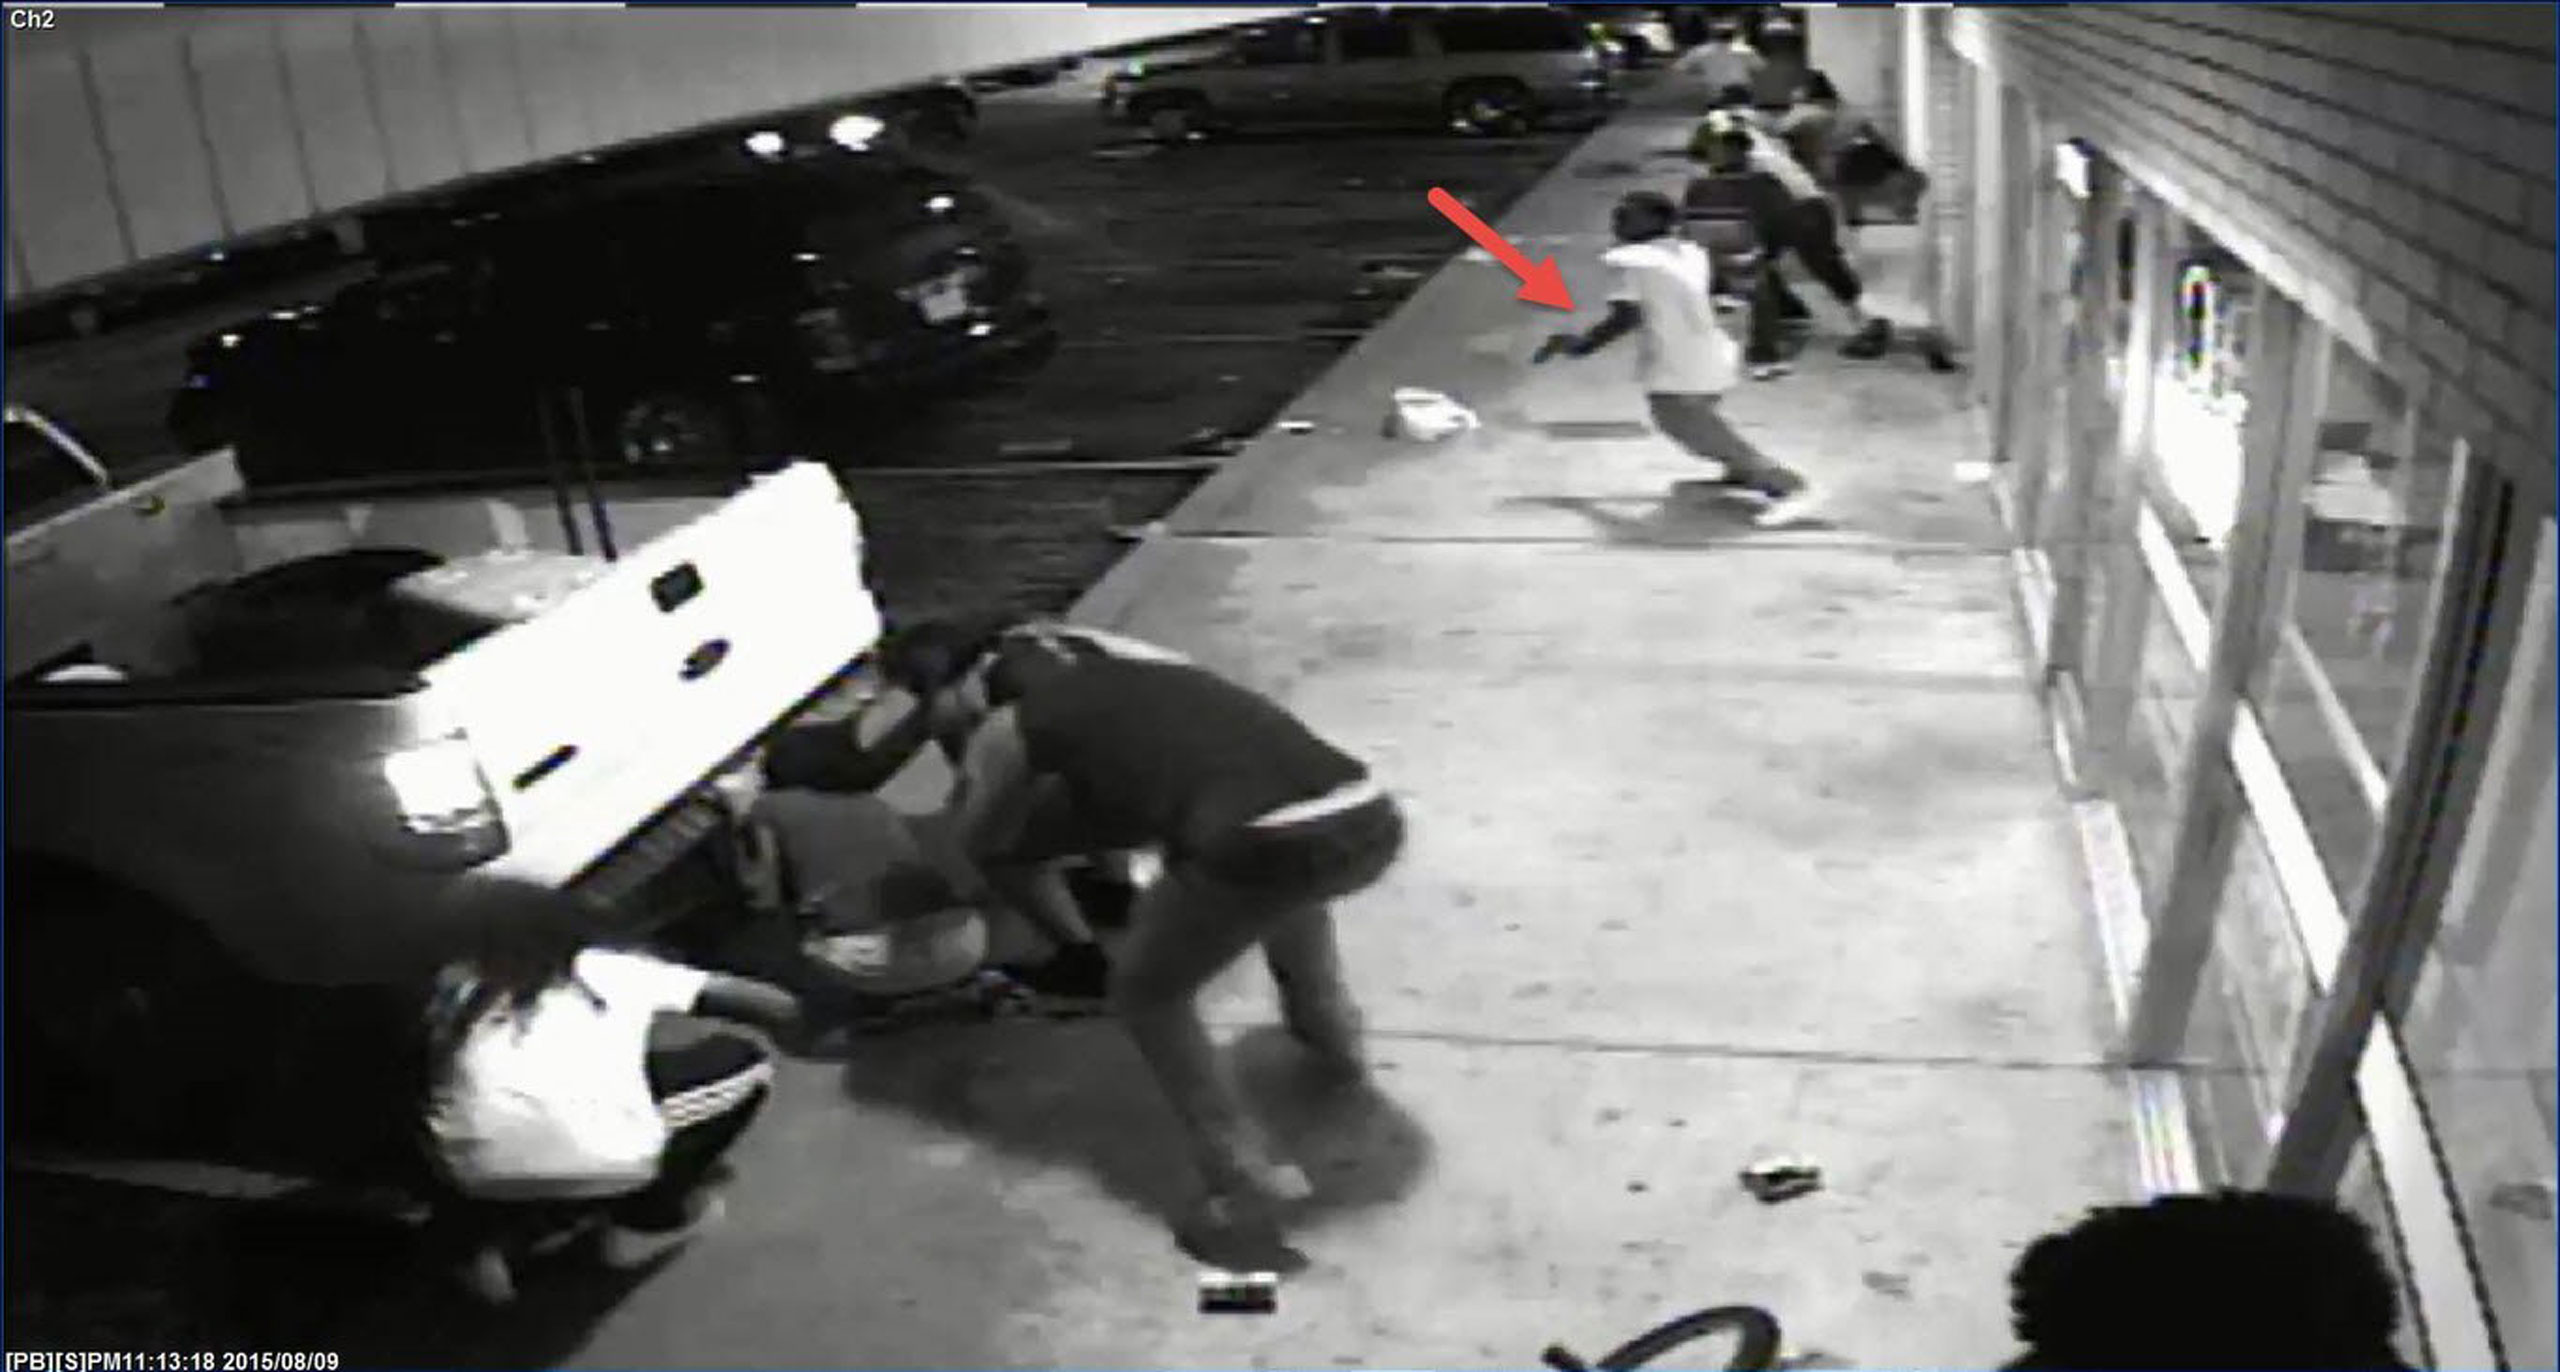 ST. LOUIS, MO - AUGUST 09: In this handout provided by the St. Louis County Police Department, video surveillance taken from Solo Insurance Services, appears to show Tyrone Harris Jr. grab a handgun out of his waistband once shots are fired during the protest in the W. Florissant corridor, prior to the officer involved shooting on August 9, 2015 in St. Louis, Missouri. Tyrone Harris Jr., was shot and wounded by detectives during protests one year after the death of Michael Brown (Photo by St. Louis County Police Department via Getty Images)